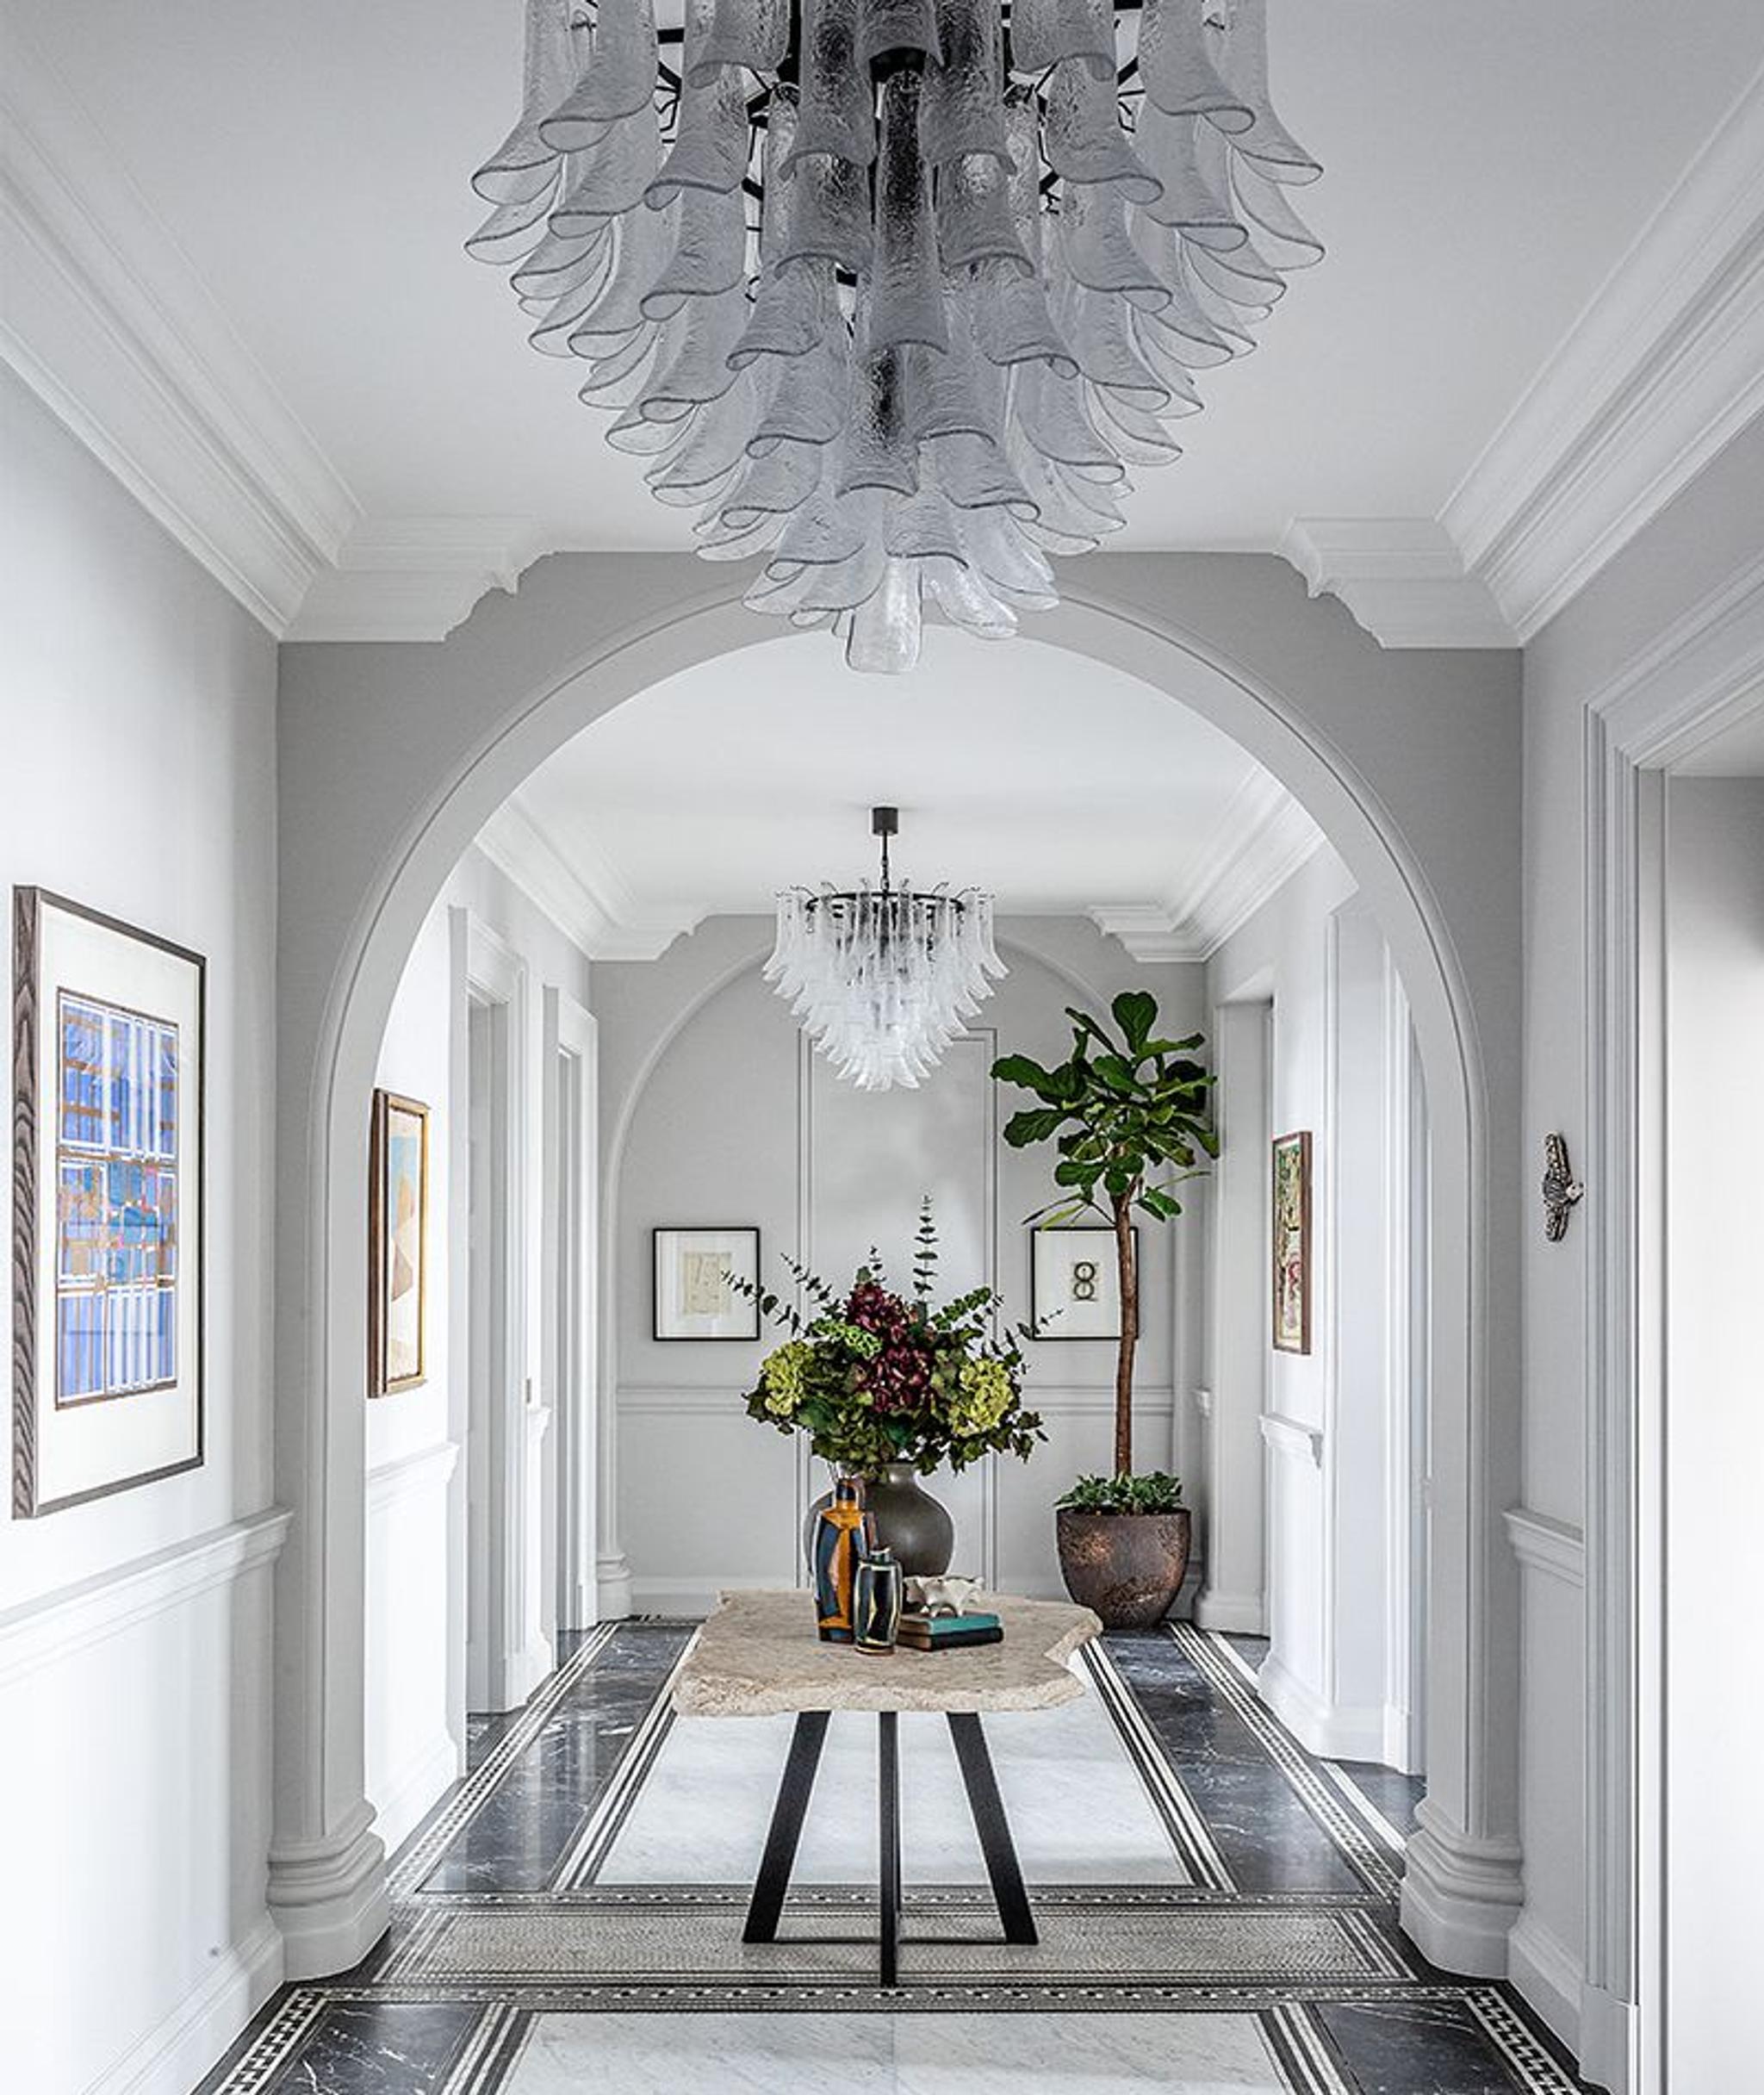 The OWO Residences, Entrance Hall: two lavish, handcrafted Murano-glass pendants set the tone for this grand entrance hall